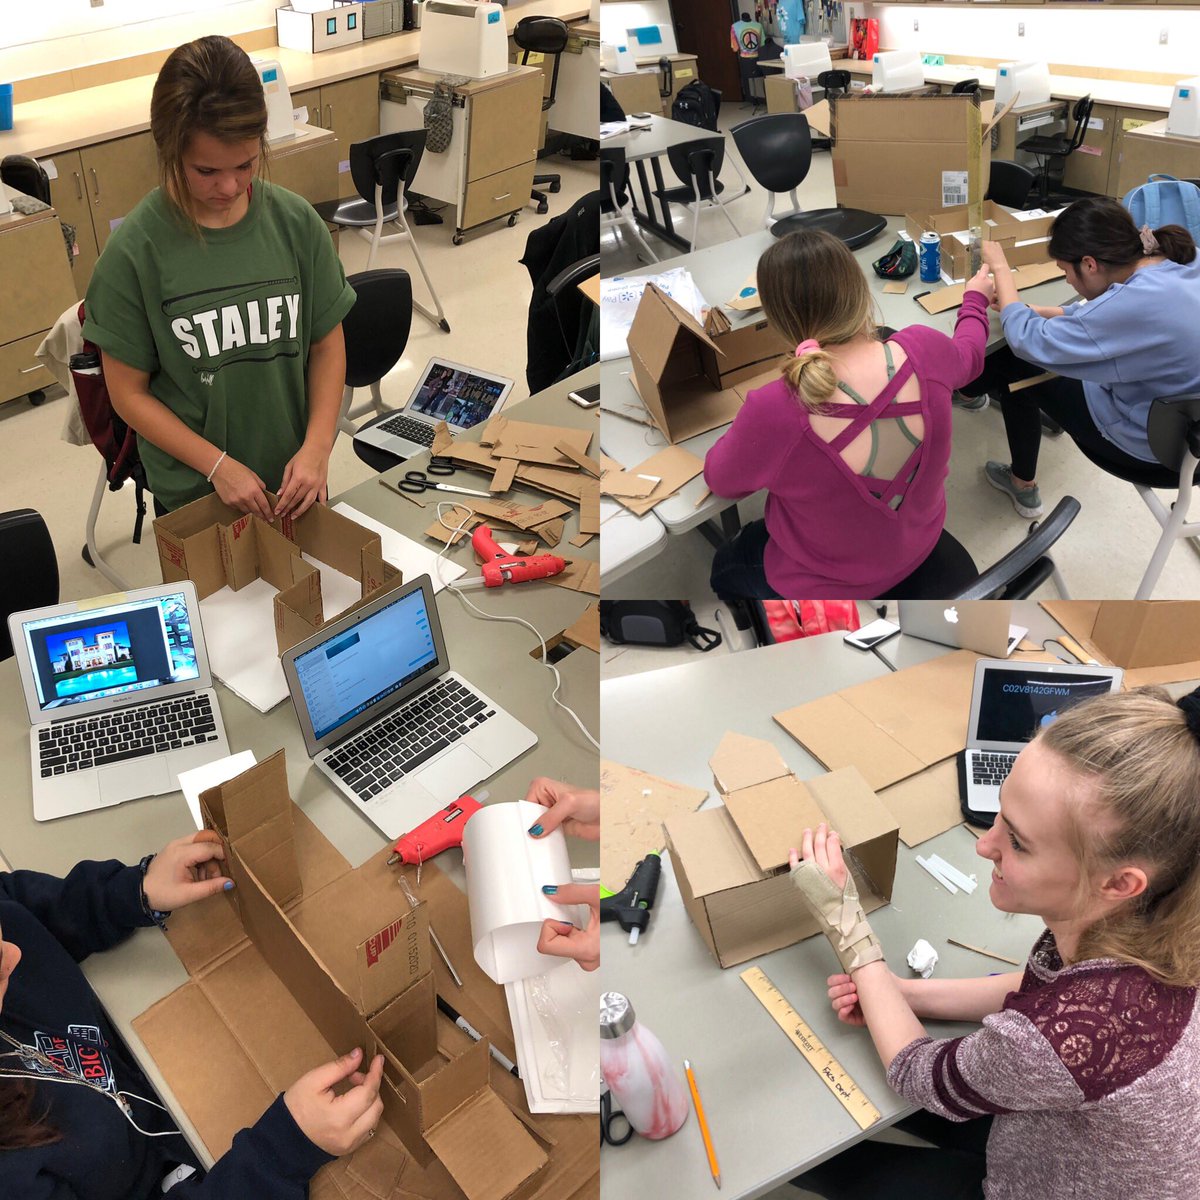 Adv. #interiordesign students hard at work with their #architecturedesign #house projects! Stay tuned! #creativeminds #design #cardboardtransformation @SHSFalcons @StaleyNews @nkcschools @interiordesignmag